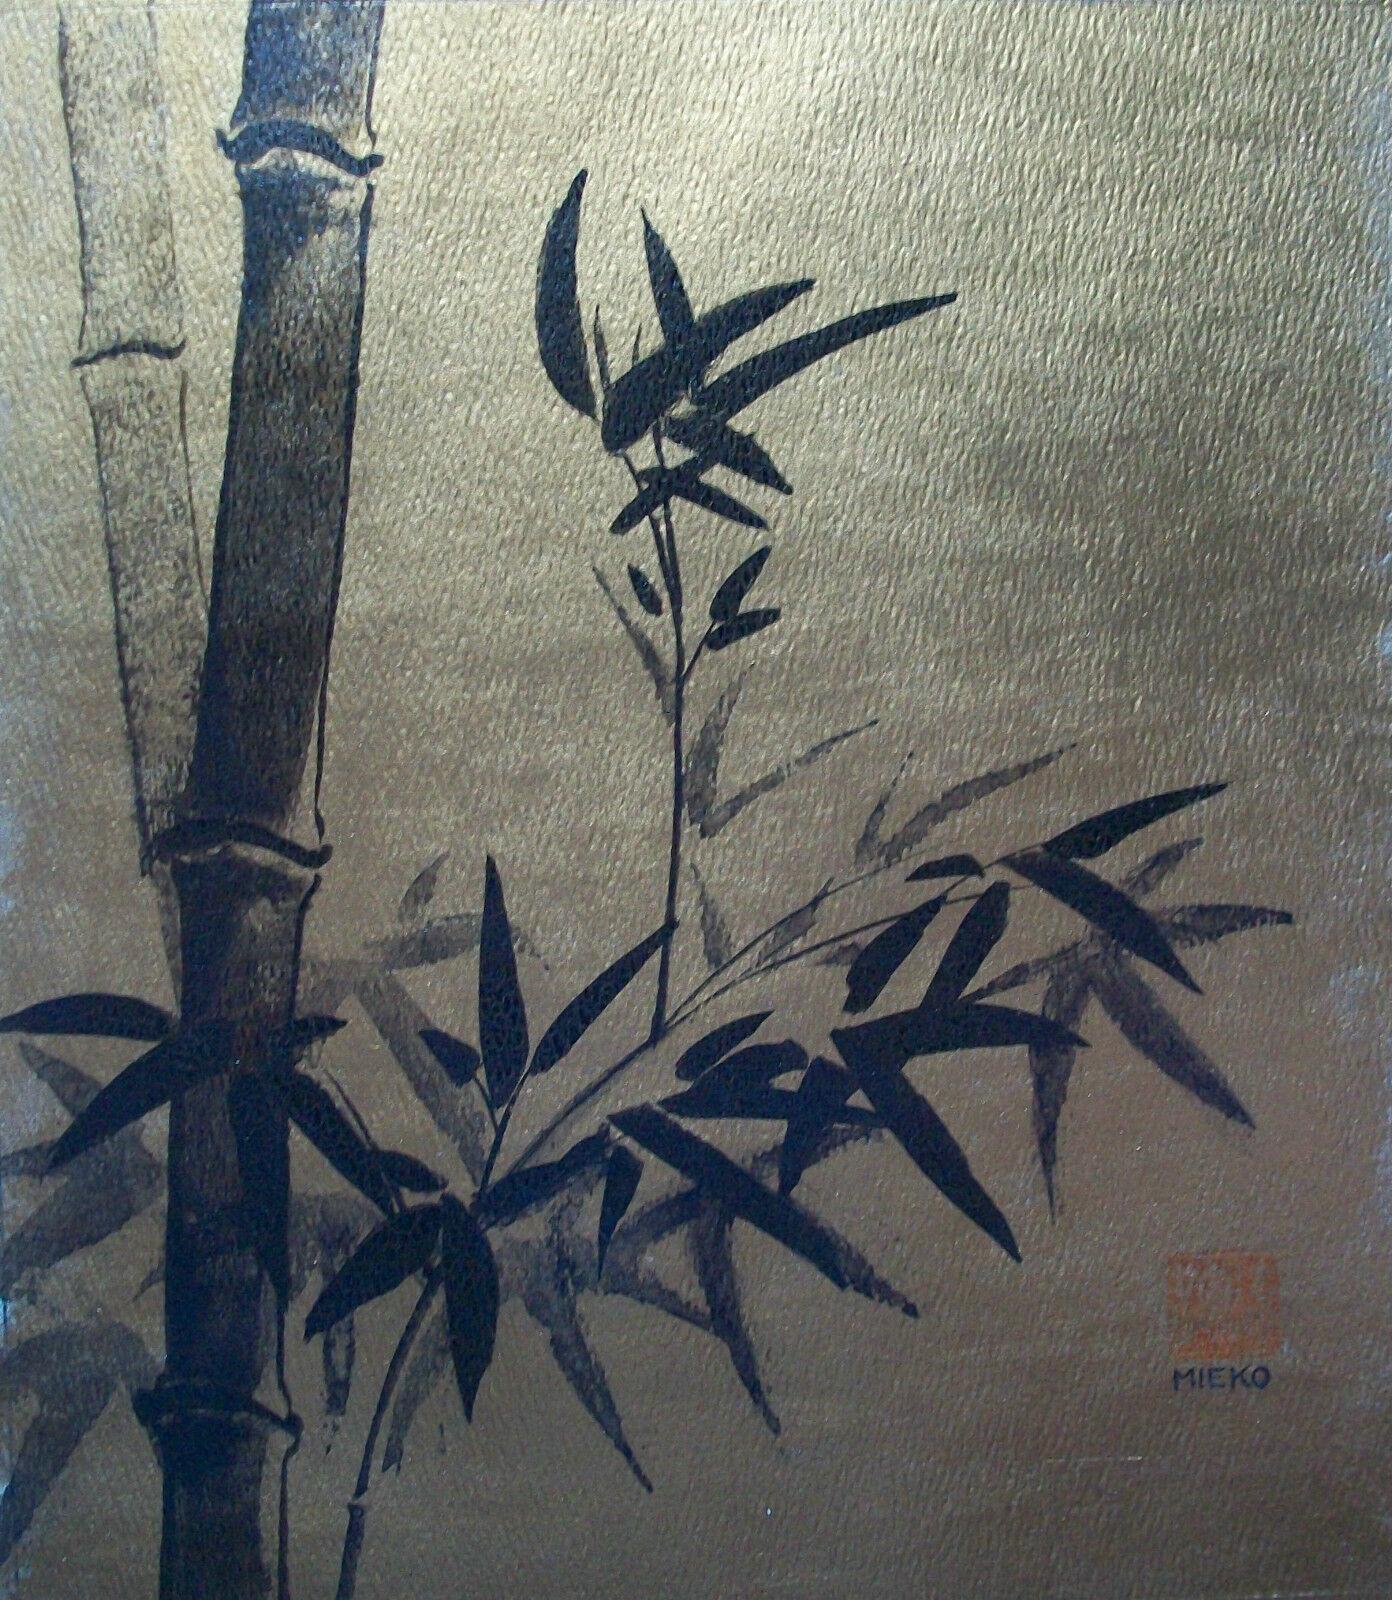 MIEKO - Vintage Asian style painting on watercolor paper - signed with the artist's chop mark and name - Japan - late 20th century.

Excellent vintage condition - bleed through to the back of the paper from the oil based gold paint - no loss - no